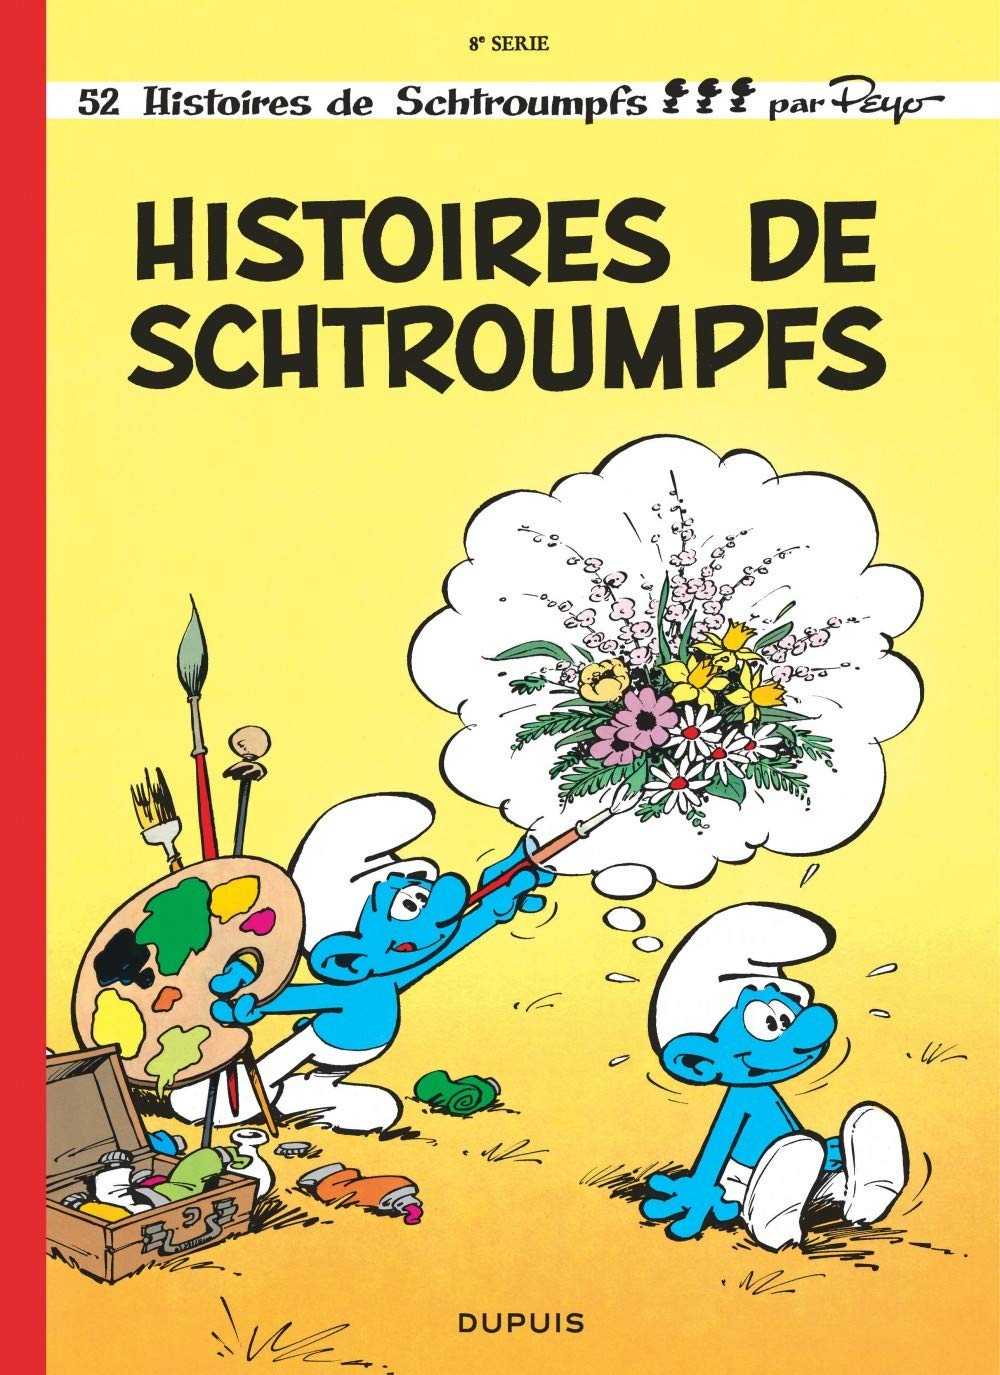 The Smurf Tales #4, Book by Peyo